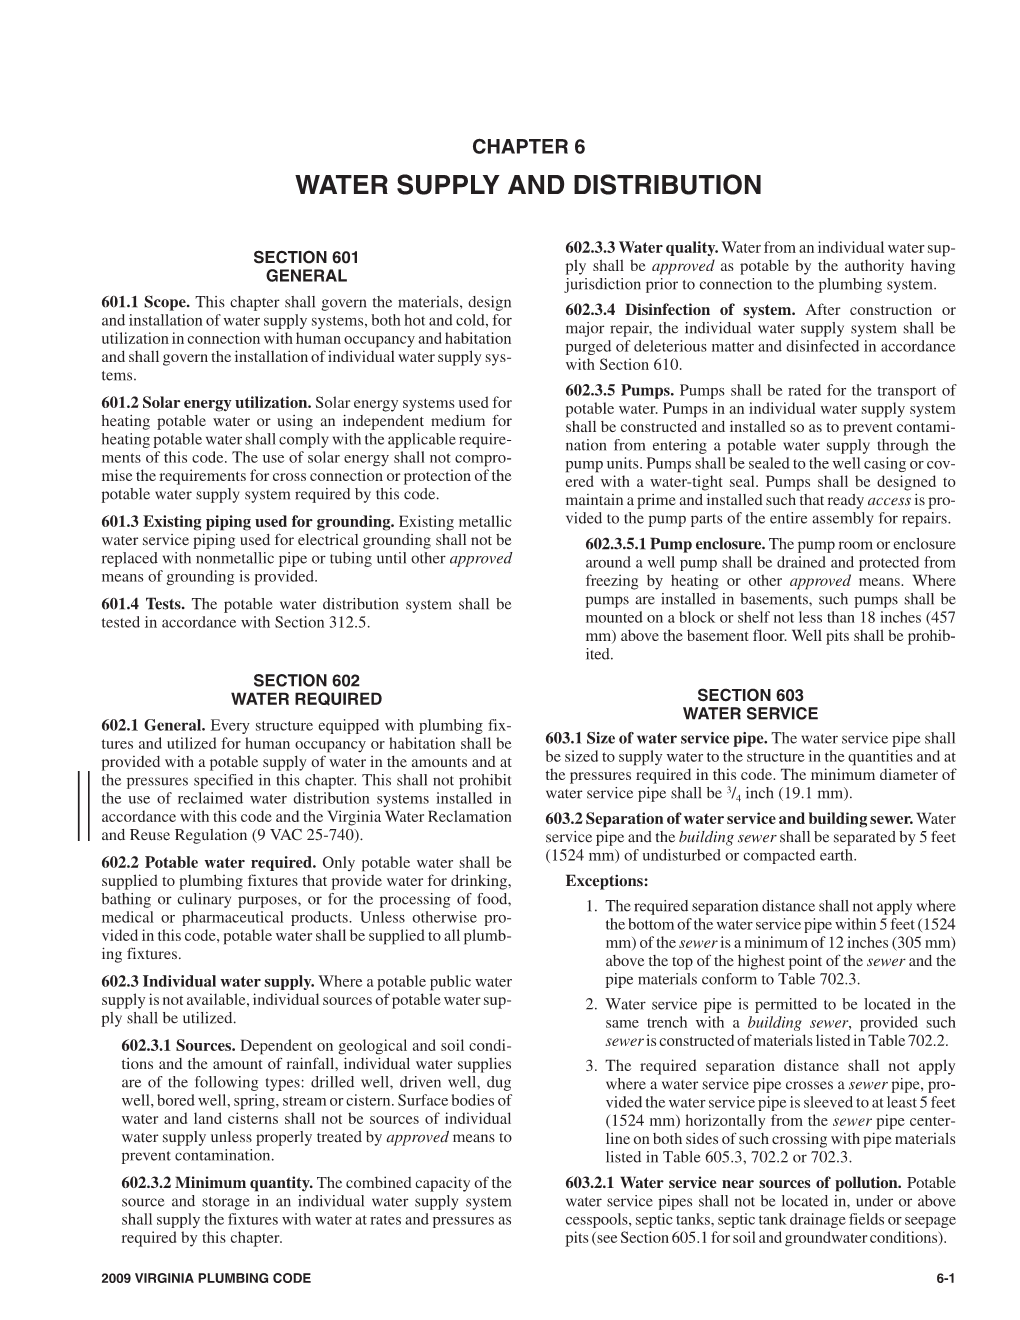 Chapter 6 Water Supply and Distribution